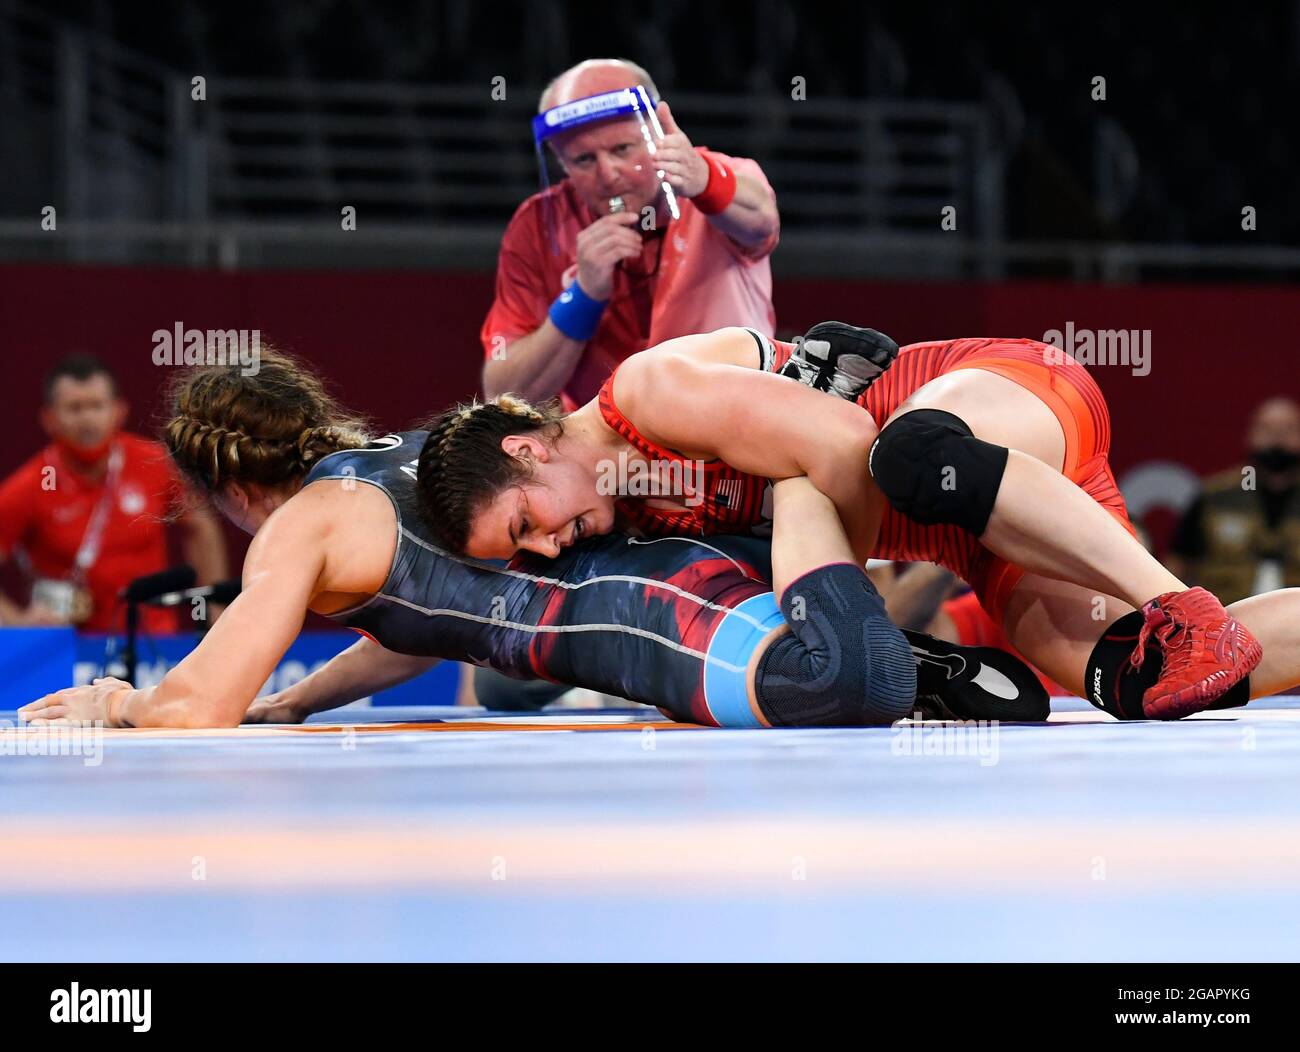 tokyo 2020 olympics wrestling freestyle women s 76kg quarterfinal makuhari messe hall a chiba japan august 1 2021 adeline maria gray of the united states in action